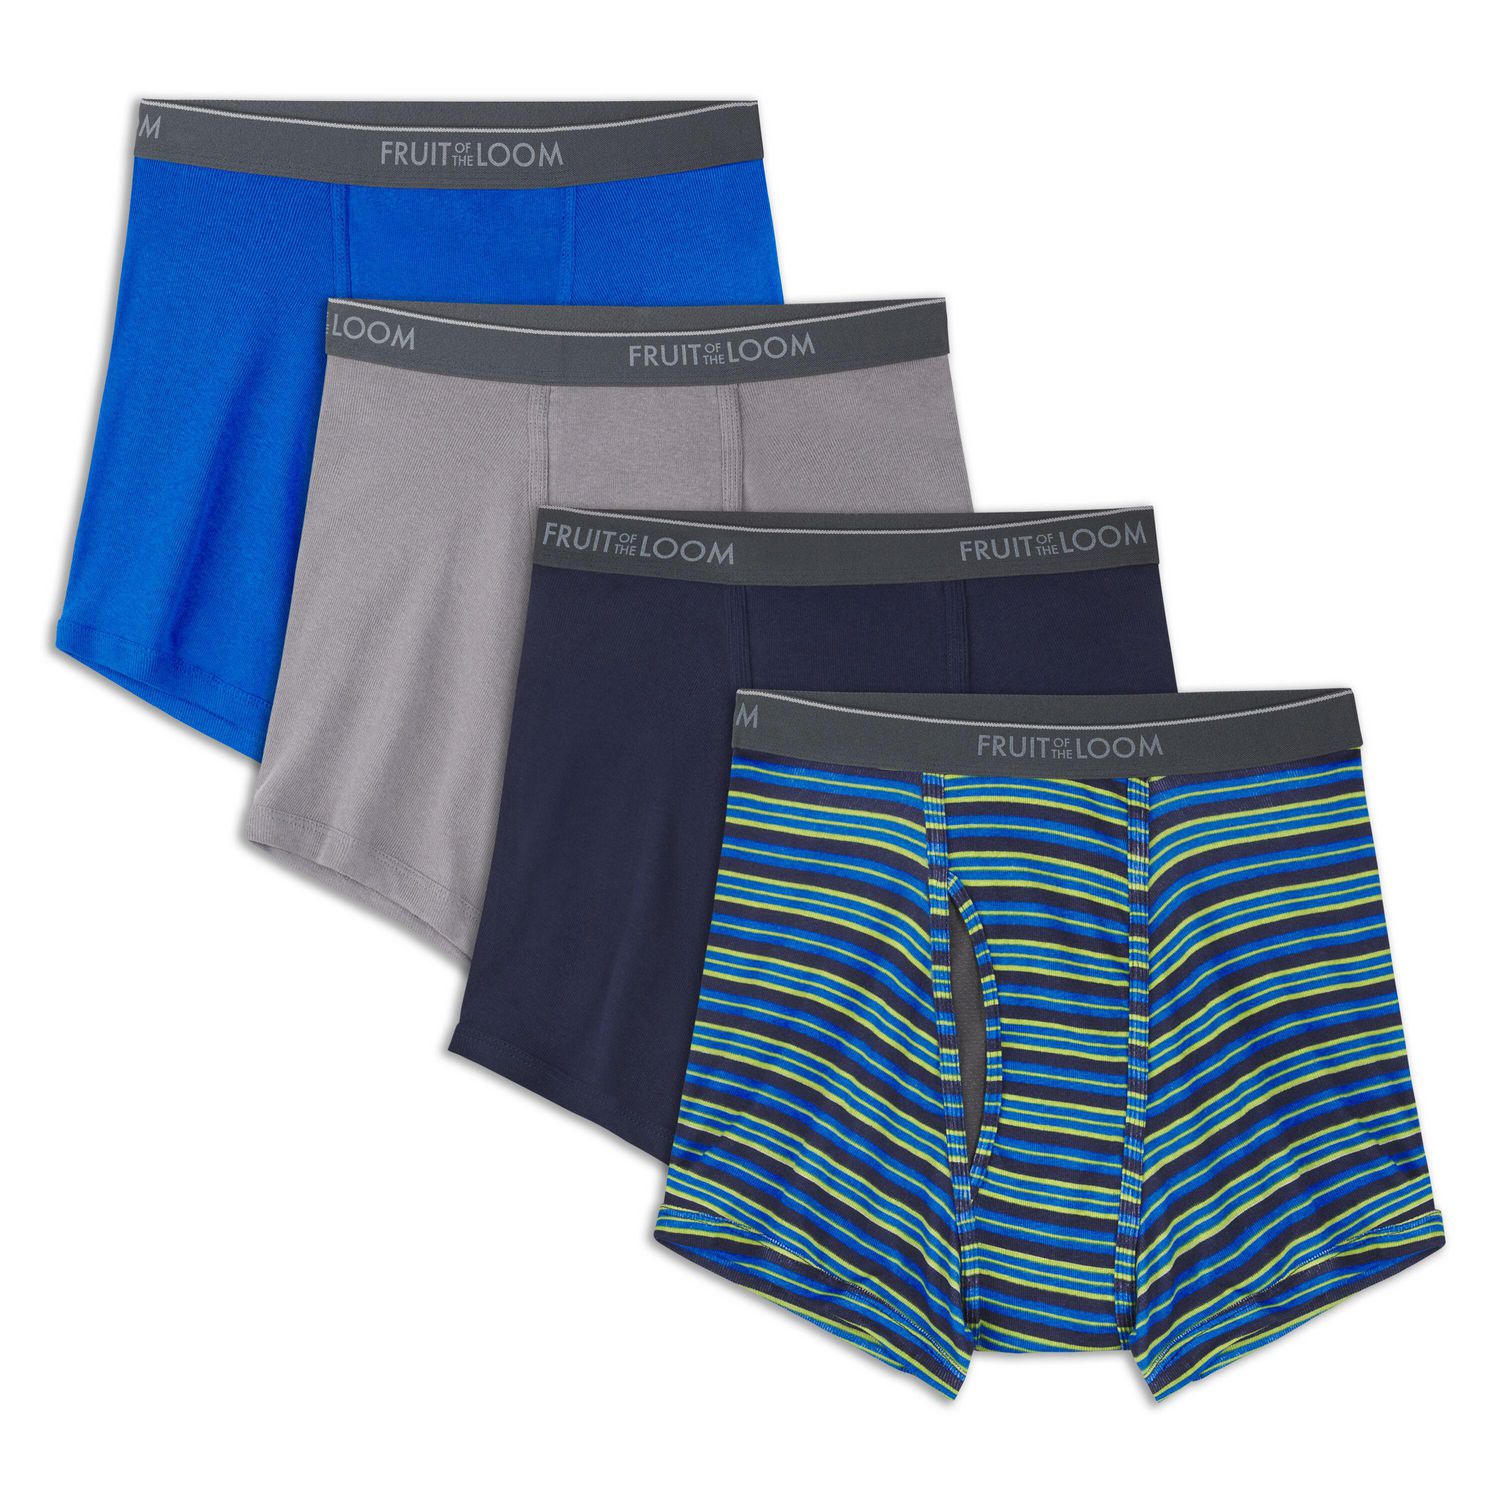 Fruit of the Loom Boys CoolZone Boxer Briefs, 5-Pack, Sizes S - XL